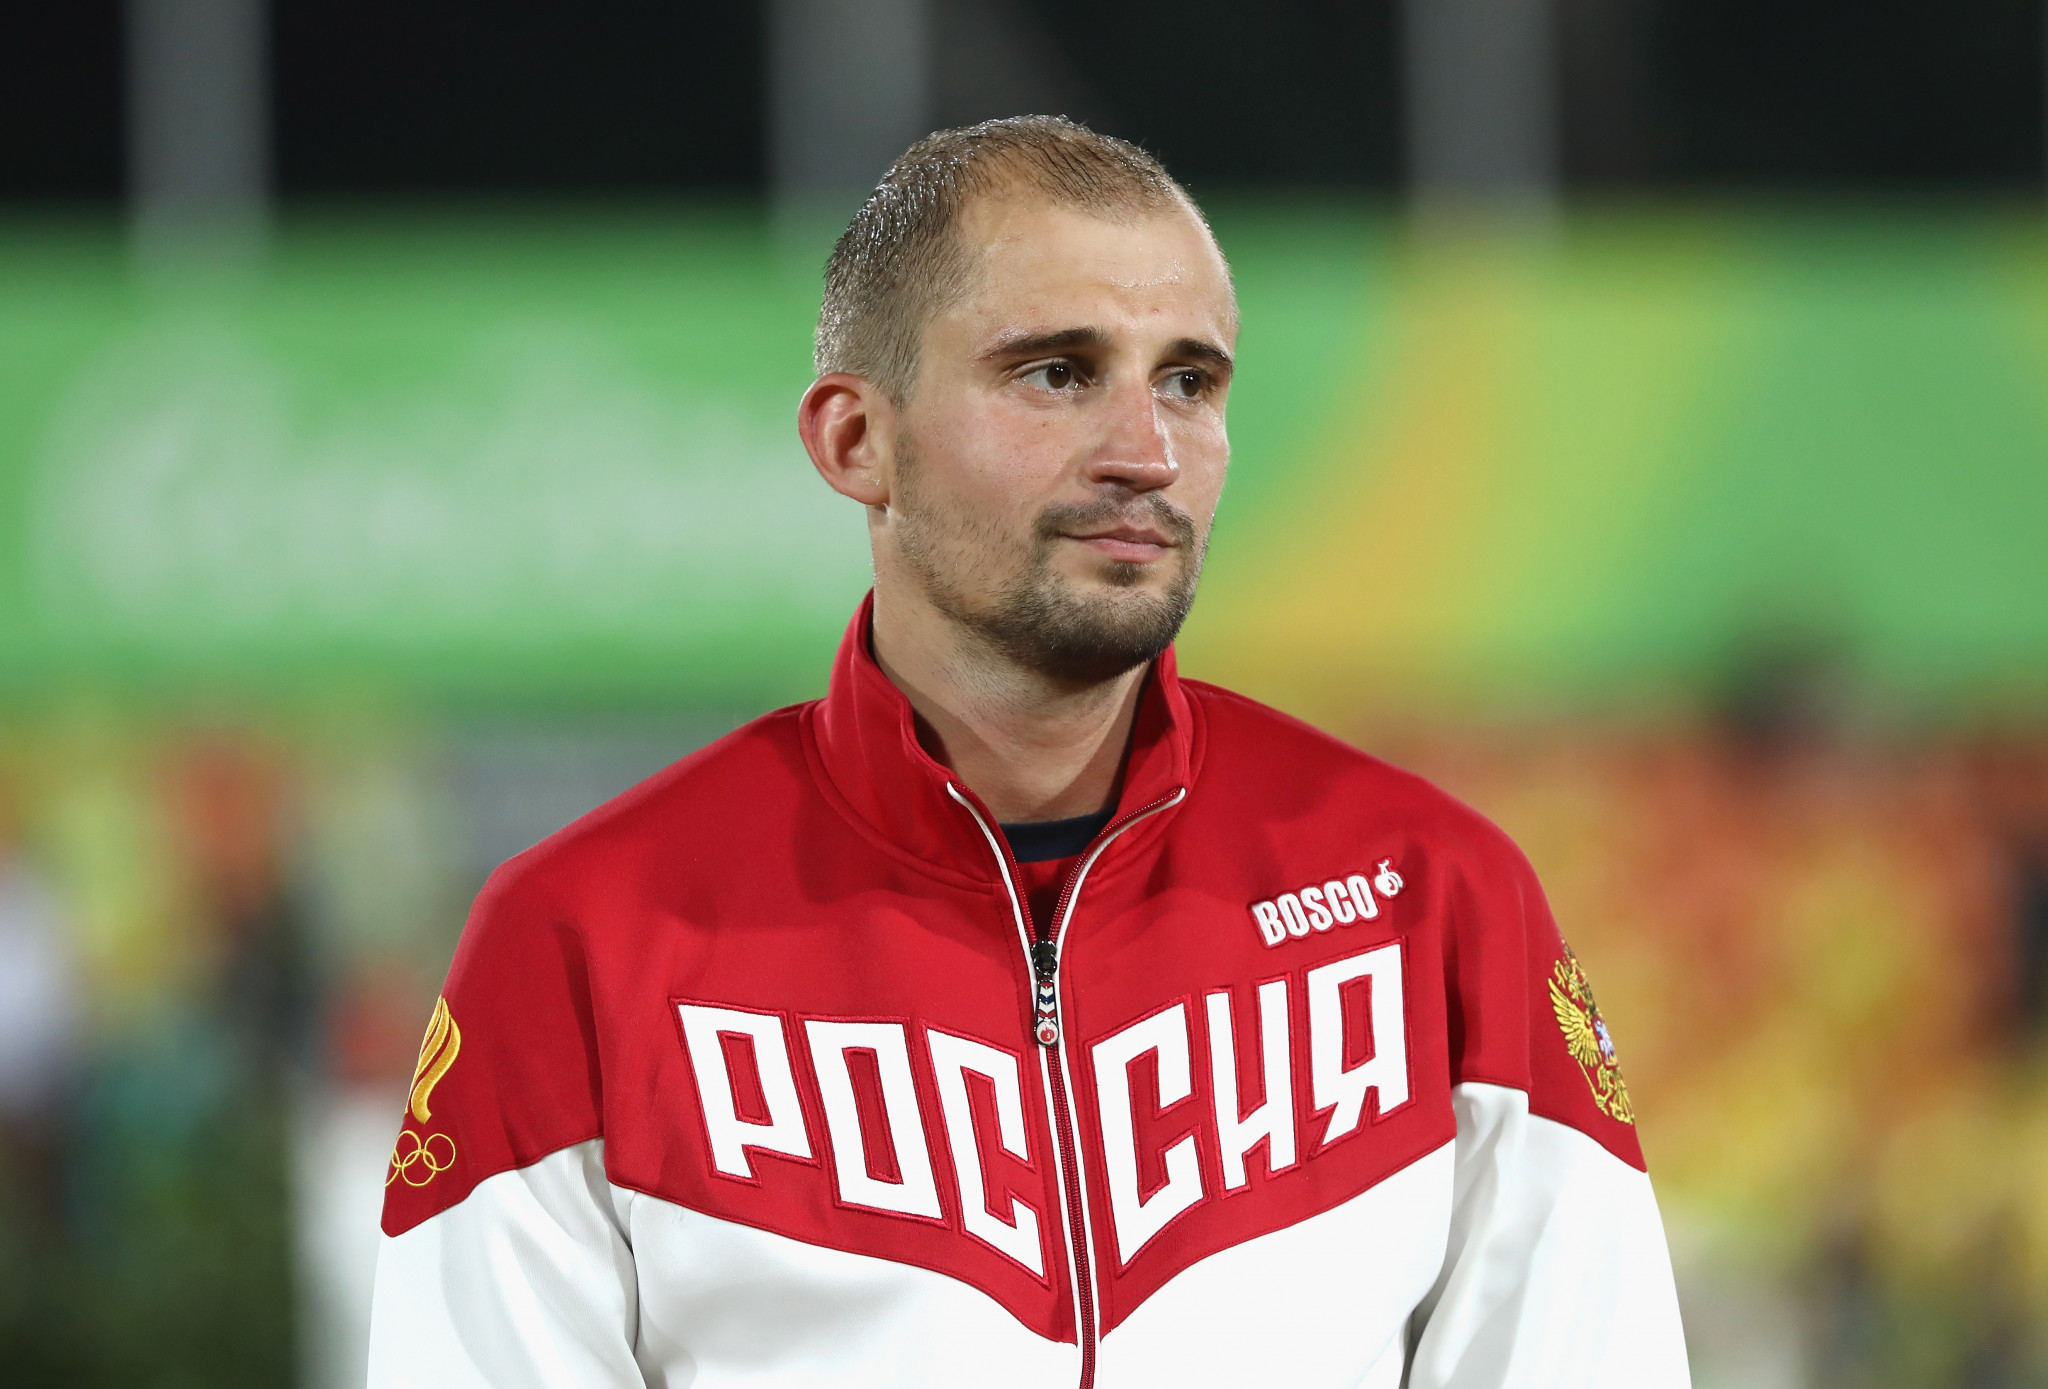 Federation of Modern Pentathlon of Russia President Vyacheslav Aminov has claimed that Alexander Lesun quit the sport after failing to qualify for the European Championships last year ©Getty Images